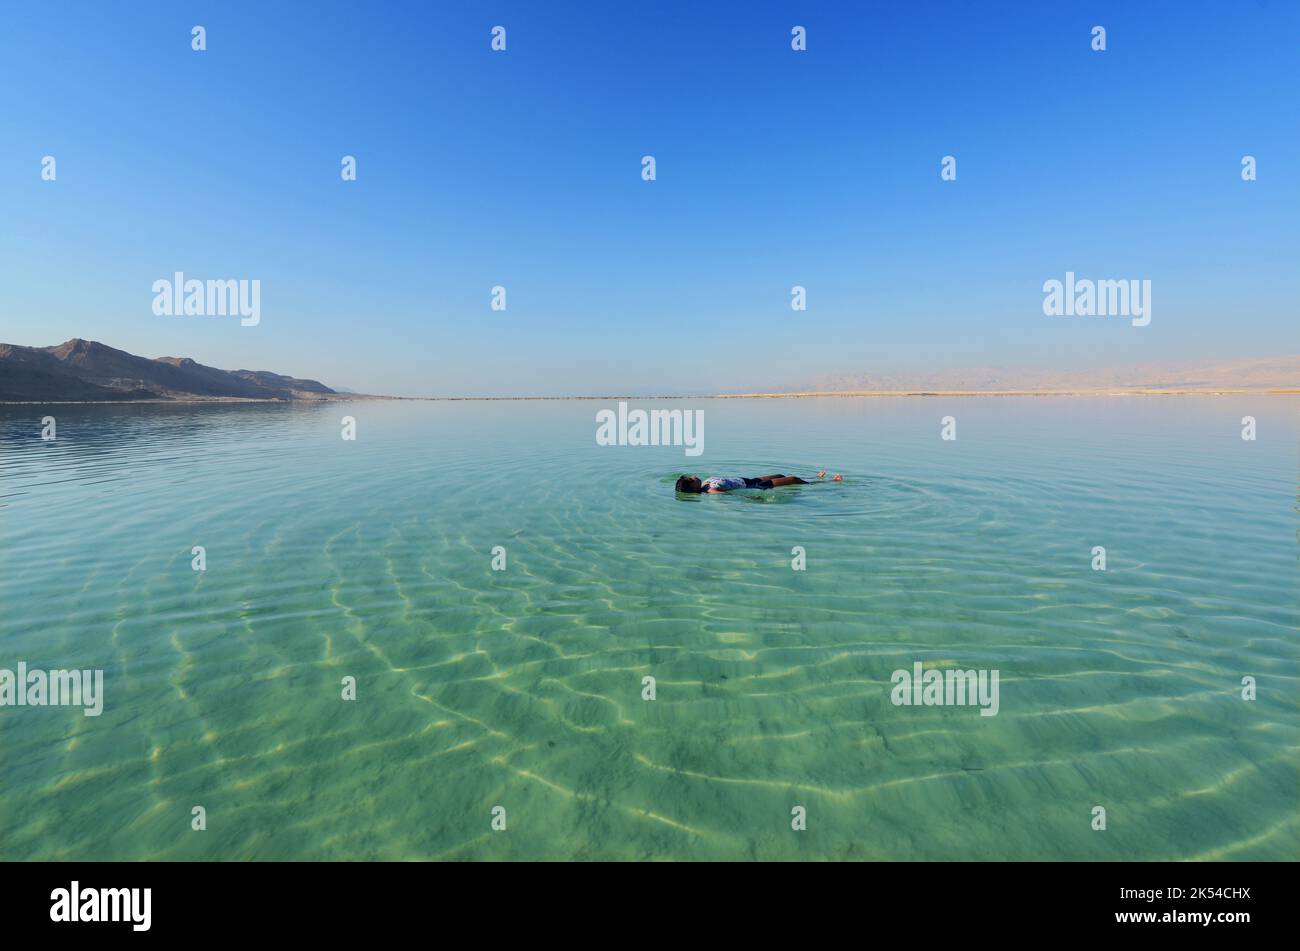 Floating on the salty water of the Dead Sea in Israel. Stock Photo